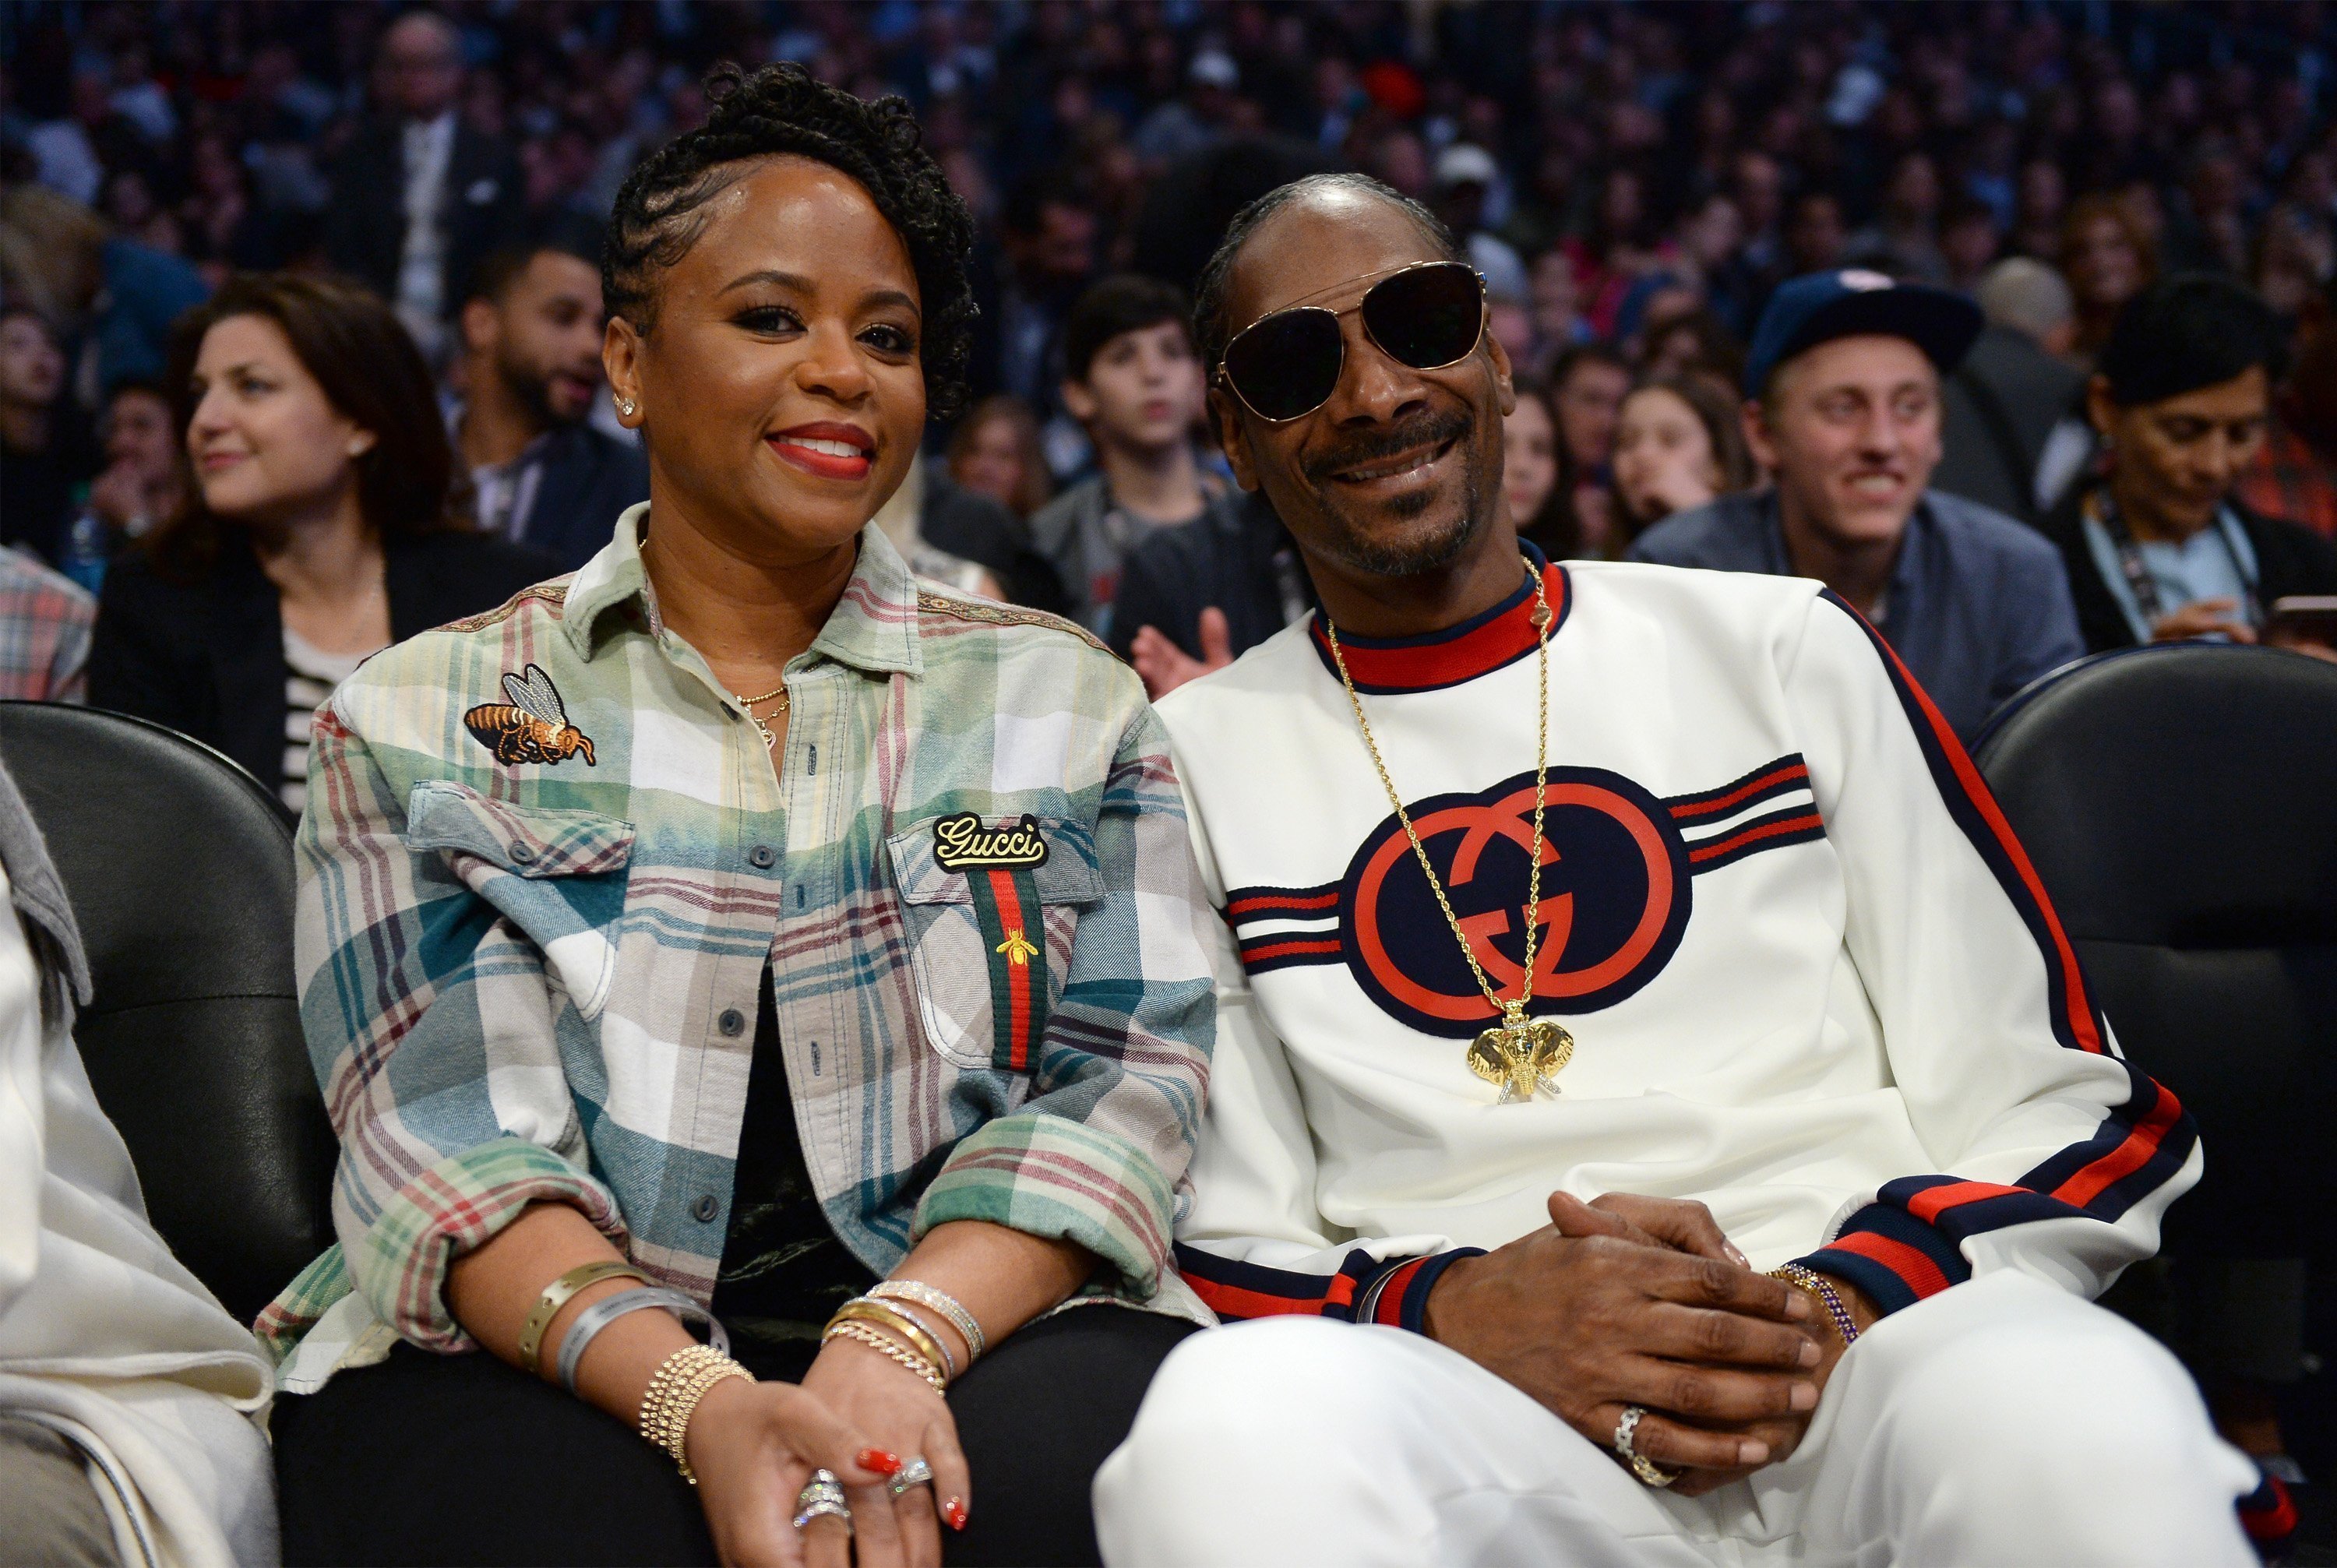 Snoop Dogg & wife Shante at the NBA All-Star Game 2018 on Feb. 18, 2018 in California | Photo: Getty Images